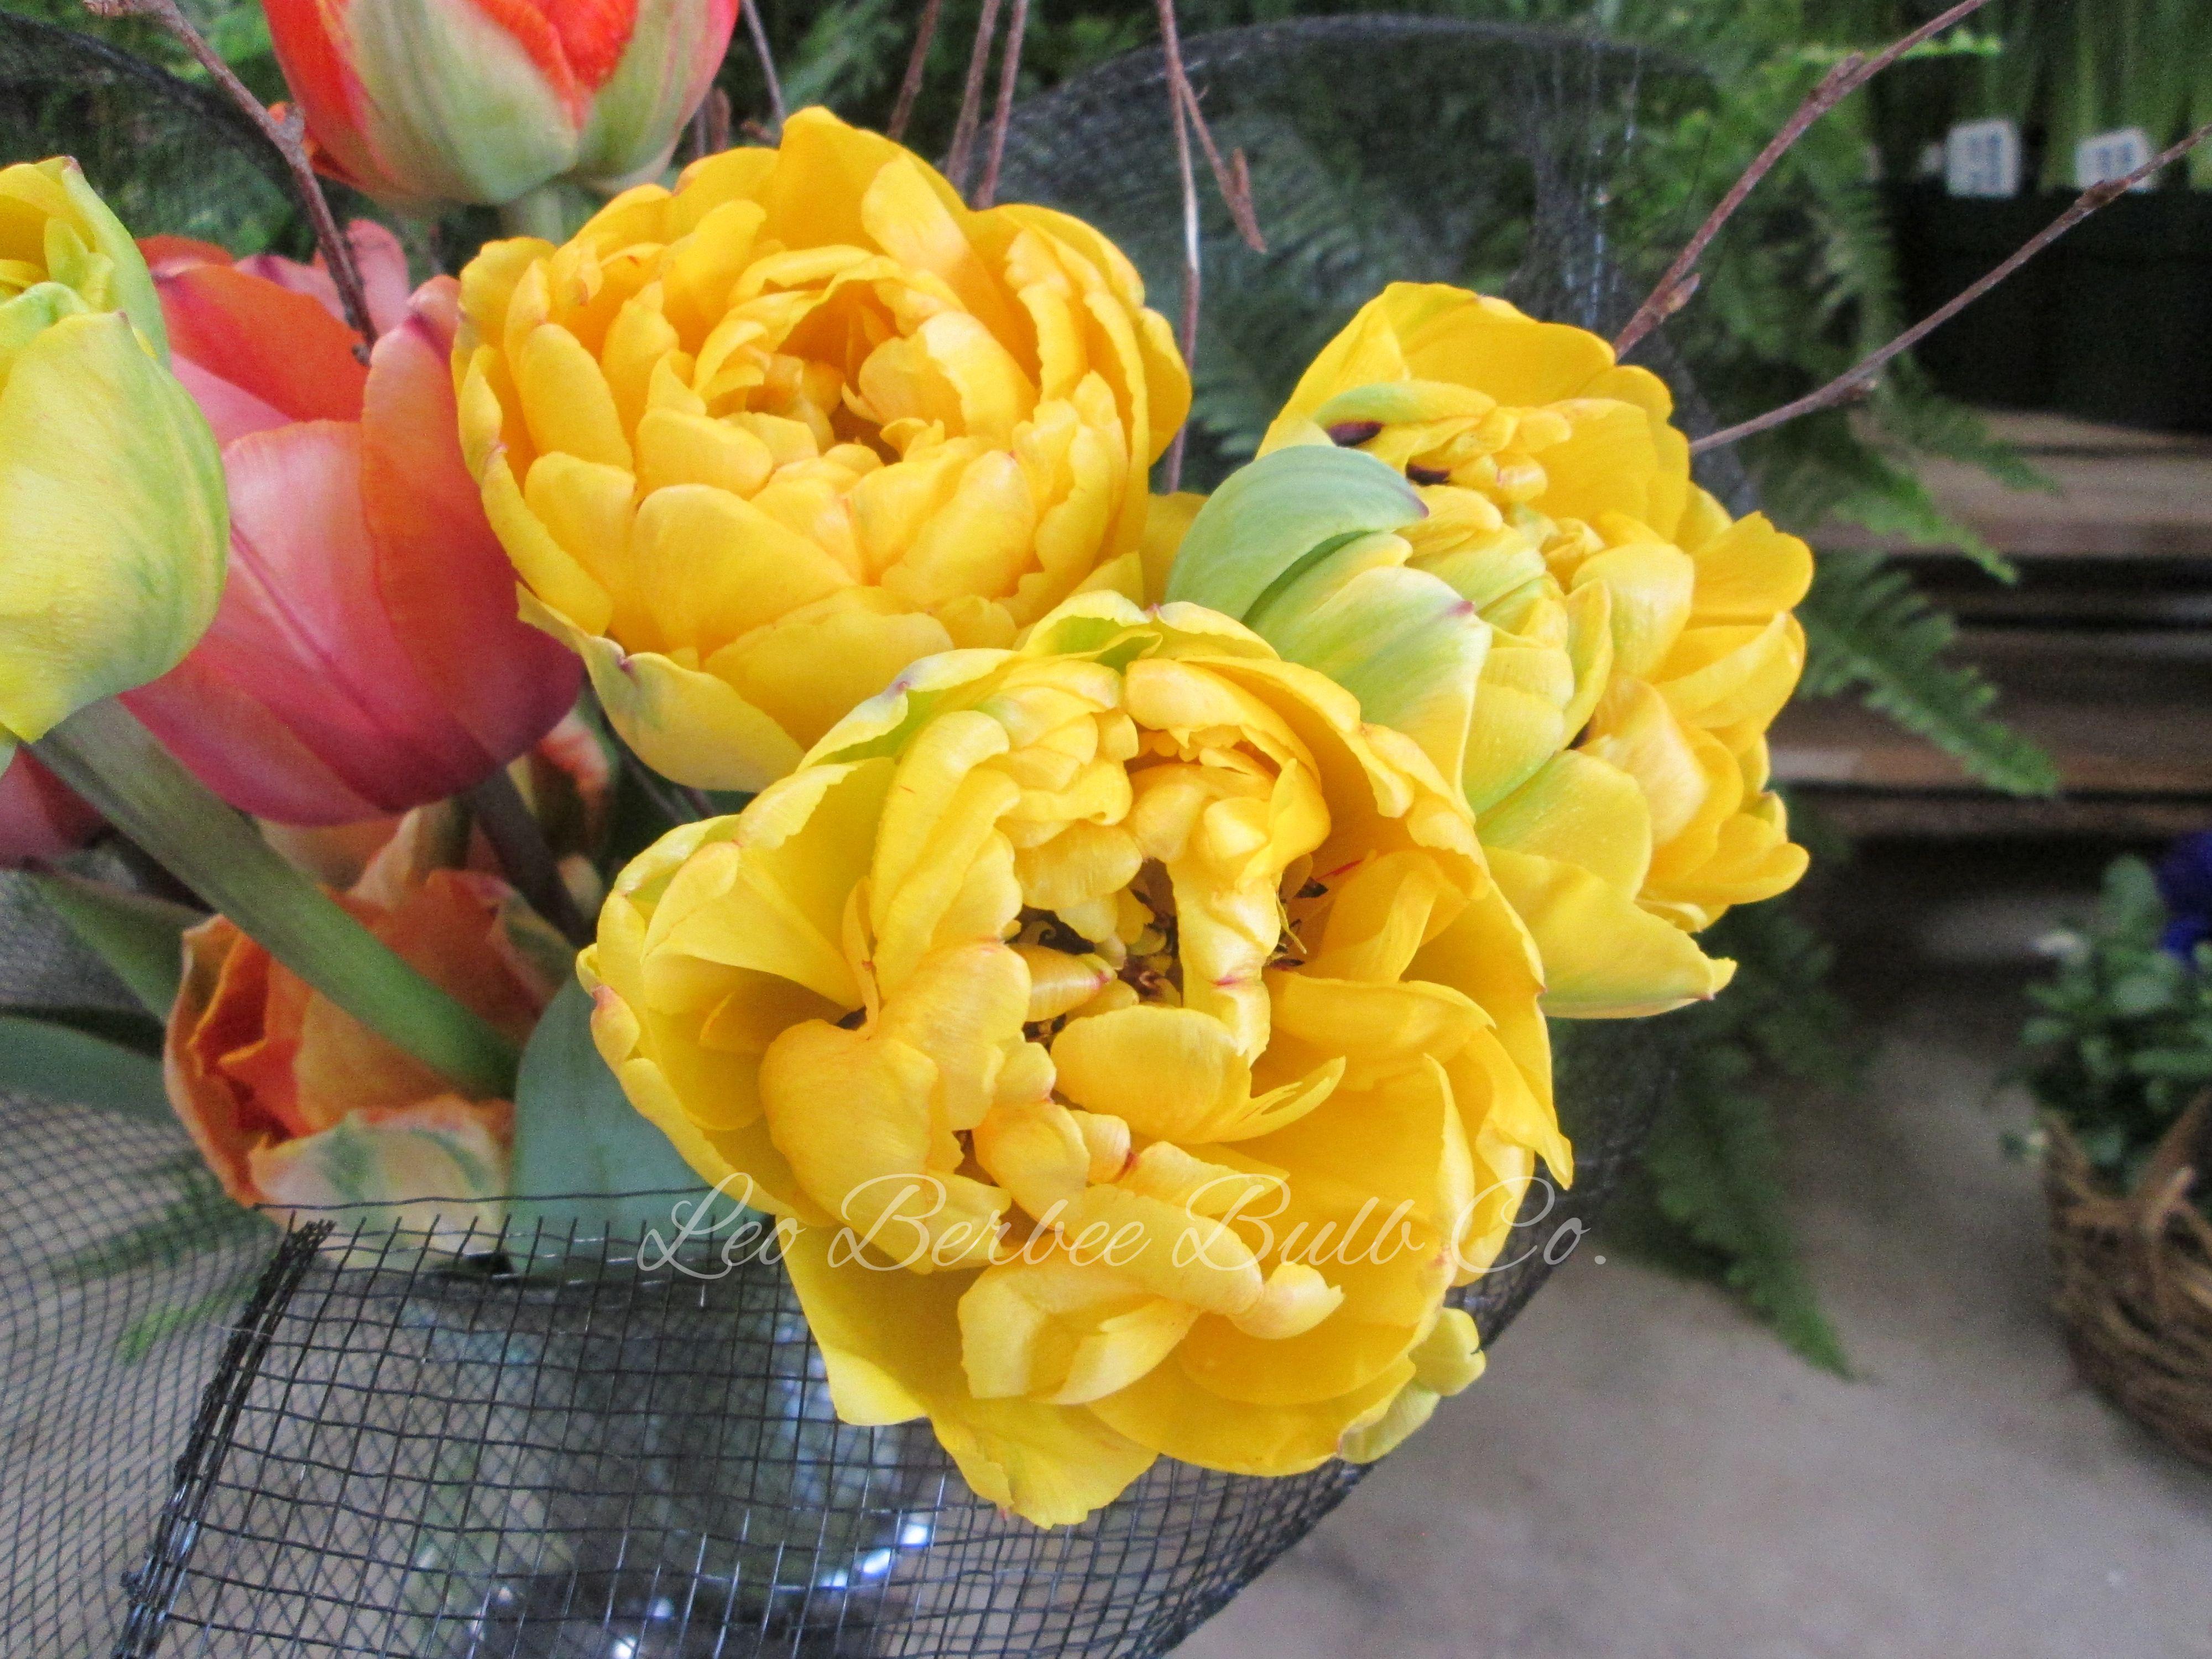 Tulip Double Late 'Yellow Pomponette' - from Leo Berbee Bulb Company